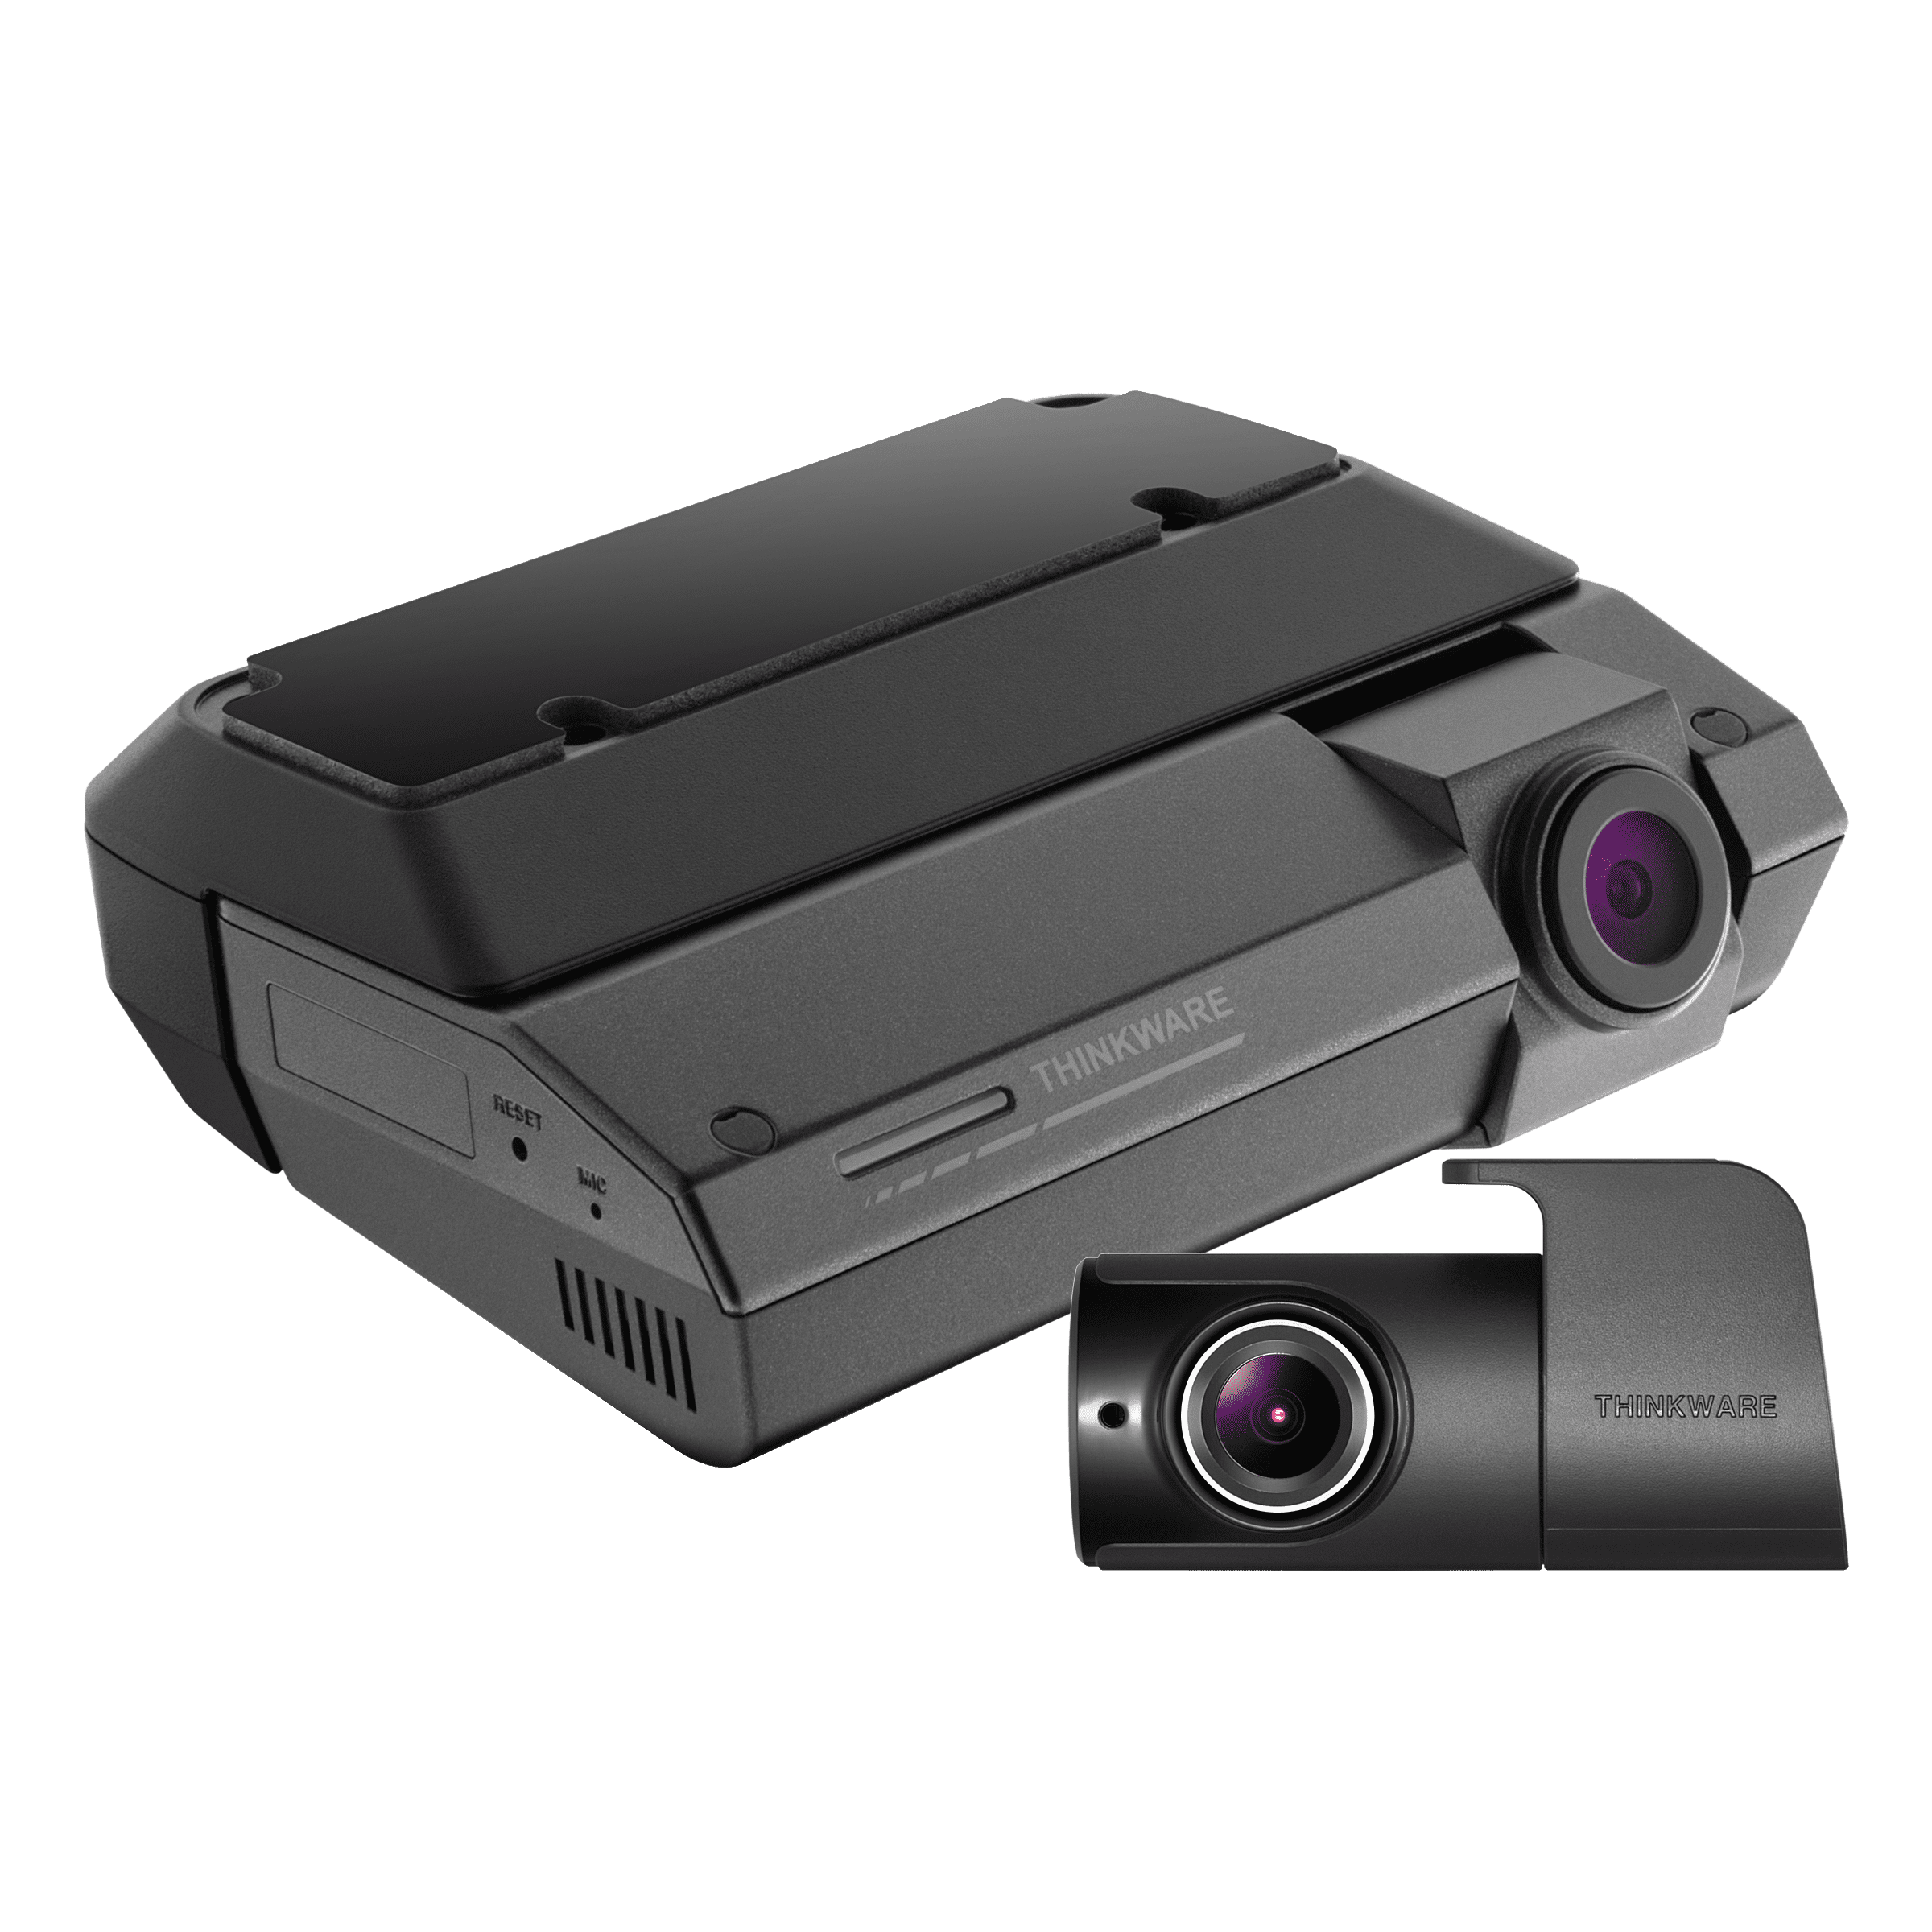 Thinkware F790 Dual Dash Cam with Full HD 1080p, Front Rear Cam, Dual Band WiFi, Built-in GPS, Parking Mode, Night Vision, Thinkware Mount and Ambarella CPU - Walmart.com